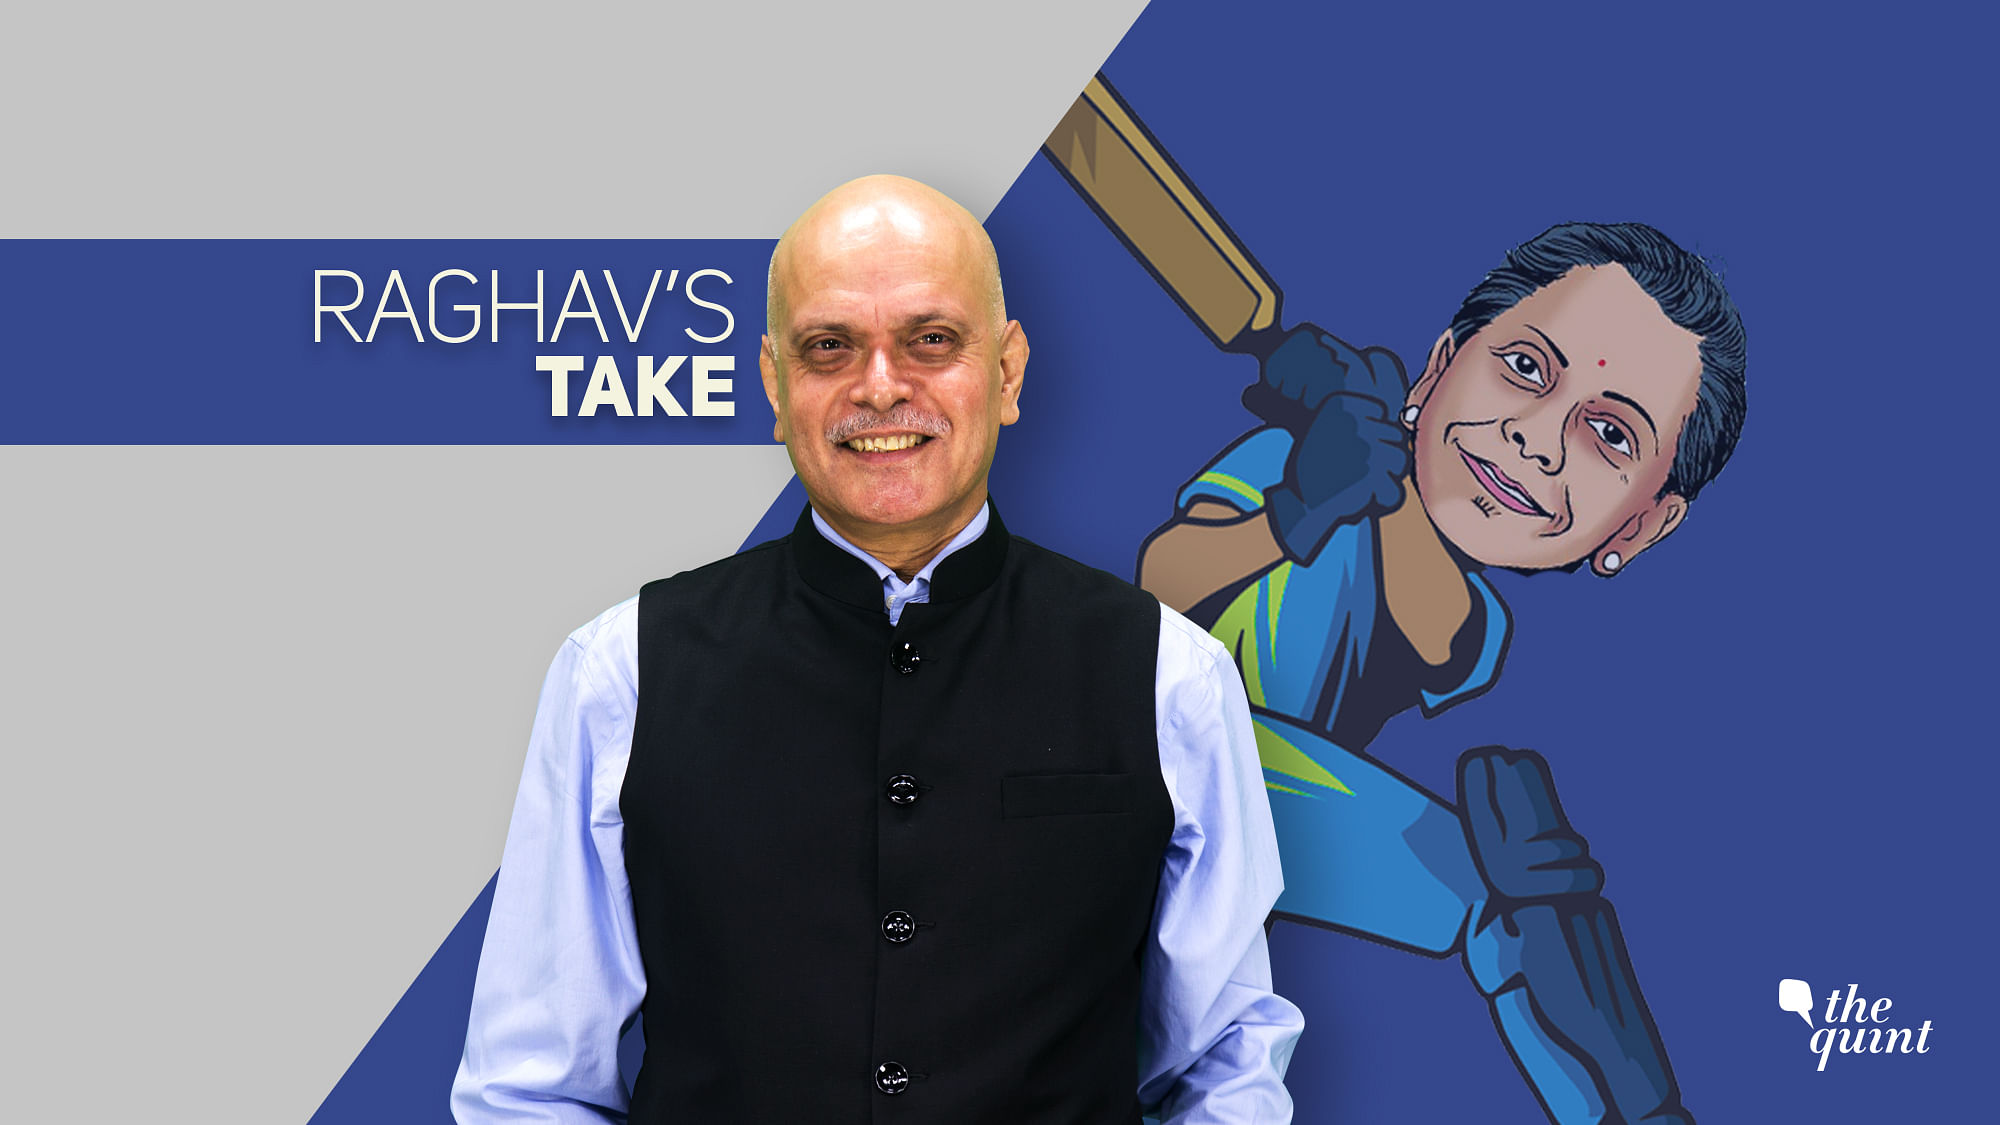 Sitharaman went from an aggressive batswoman to an erratic accountant before finally walking back to dressing room.